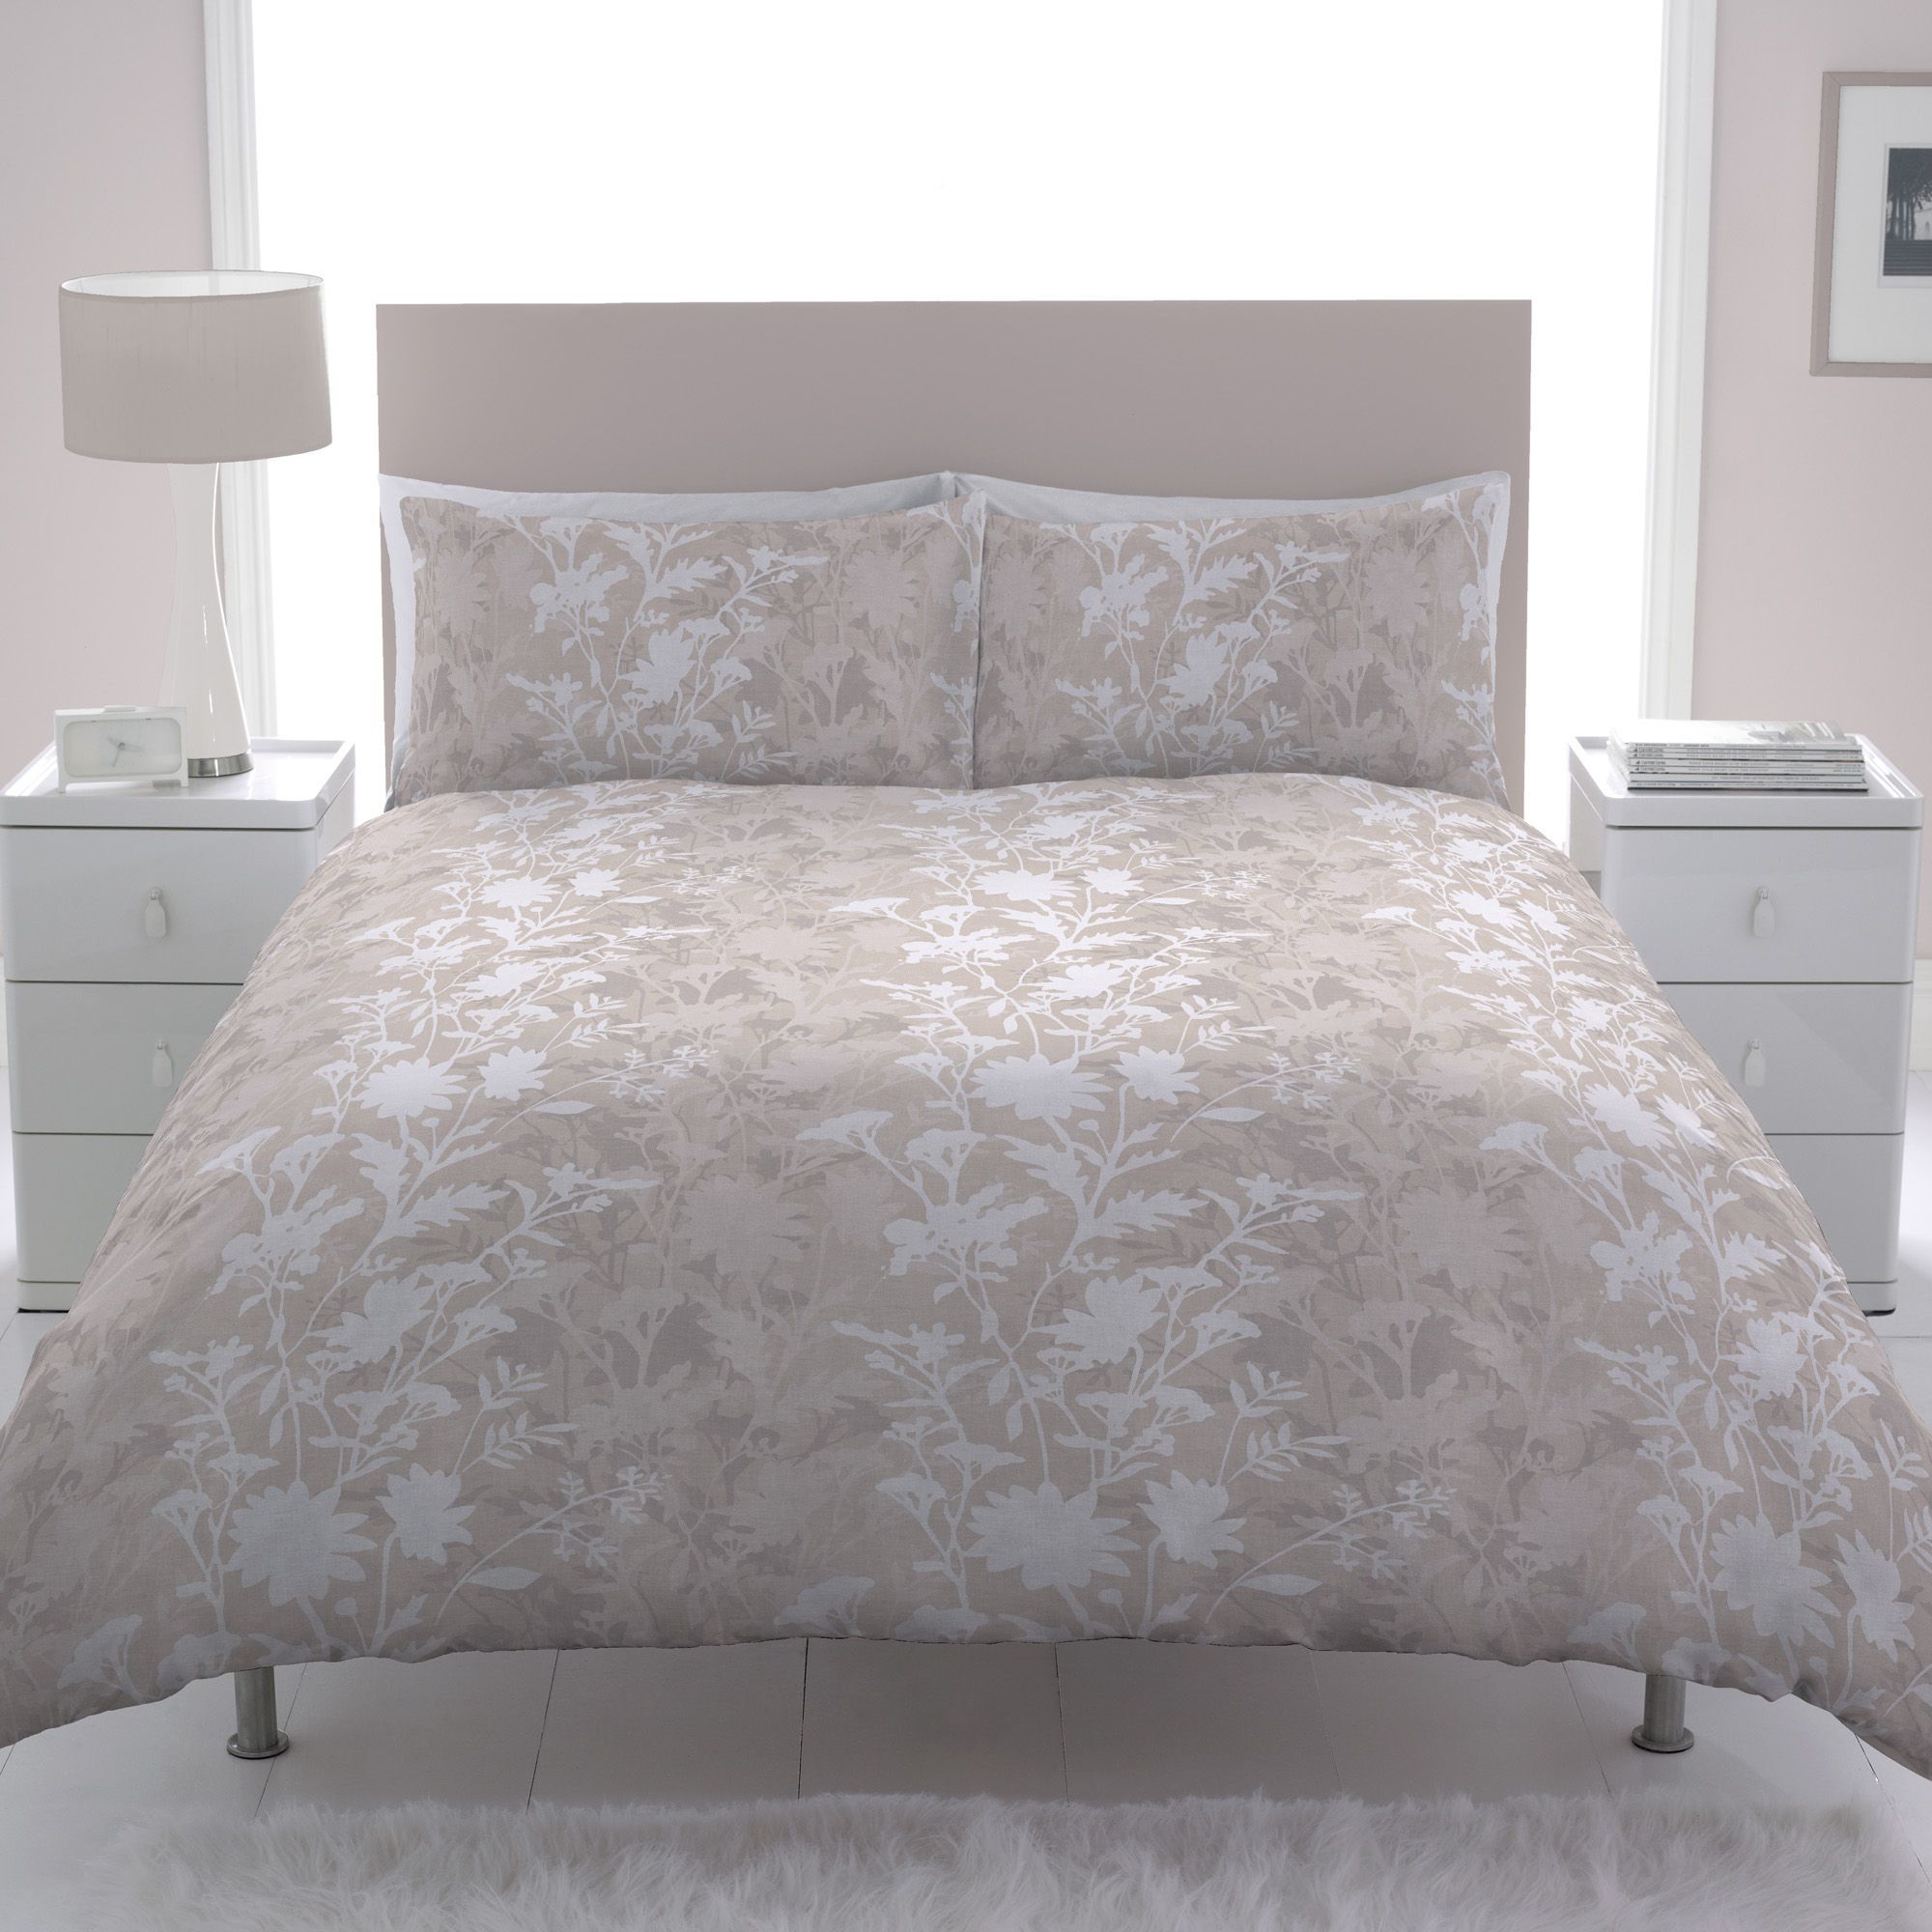 Chartwell Caitlin Floral Beige White King Size Bed Cover Set